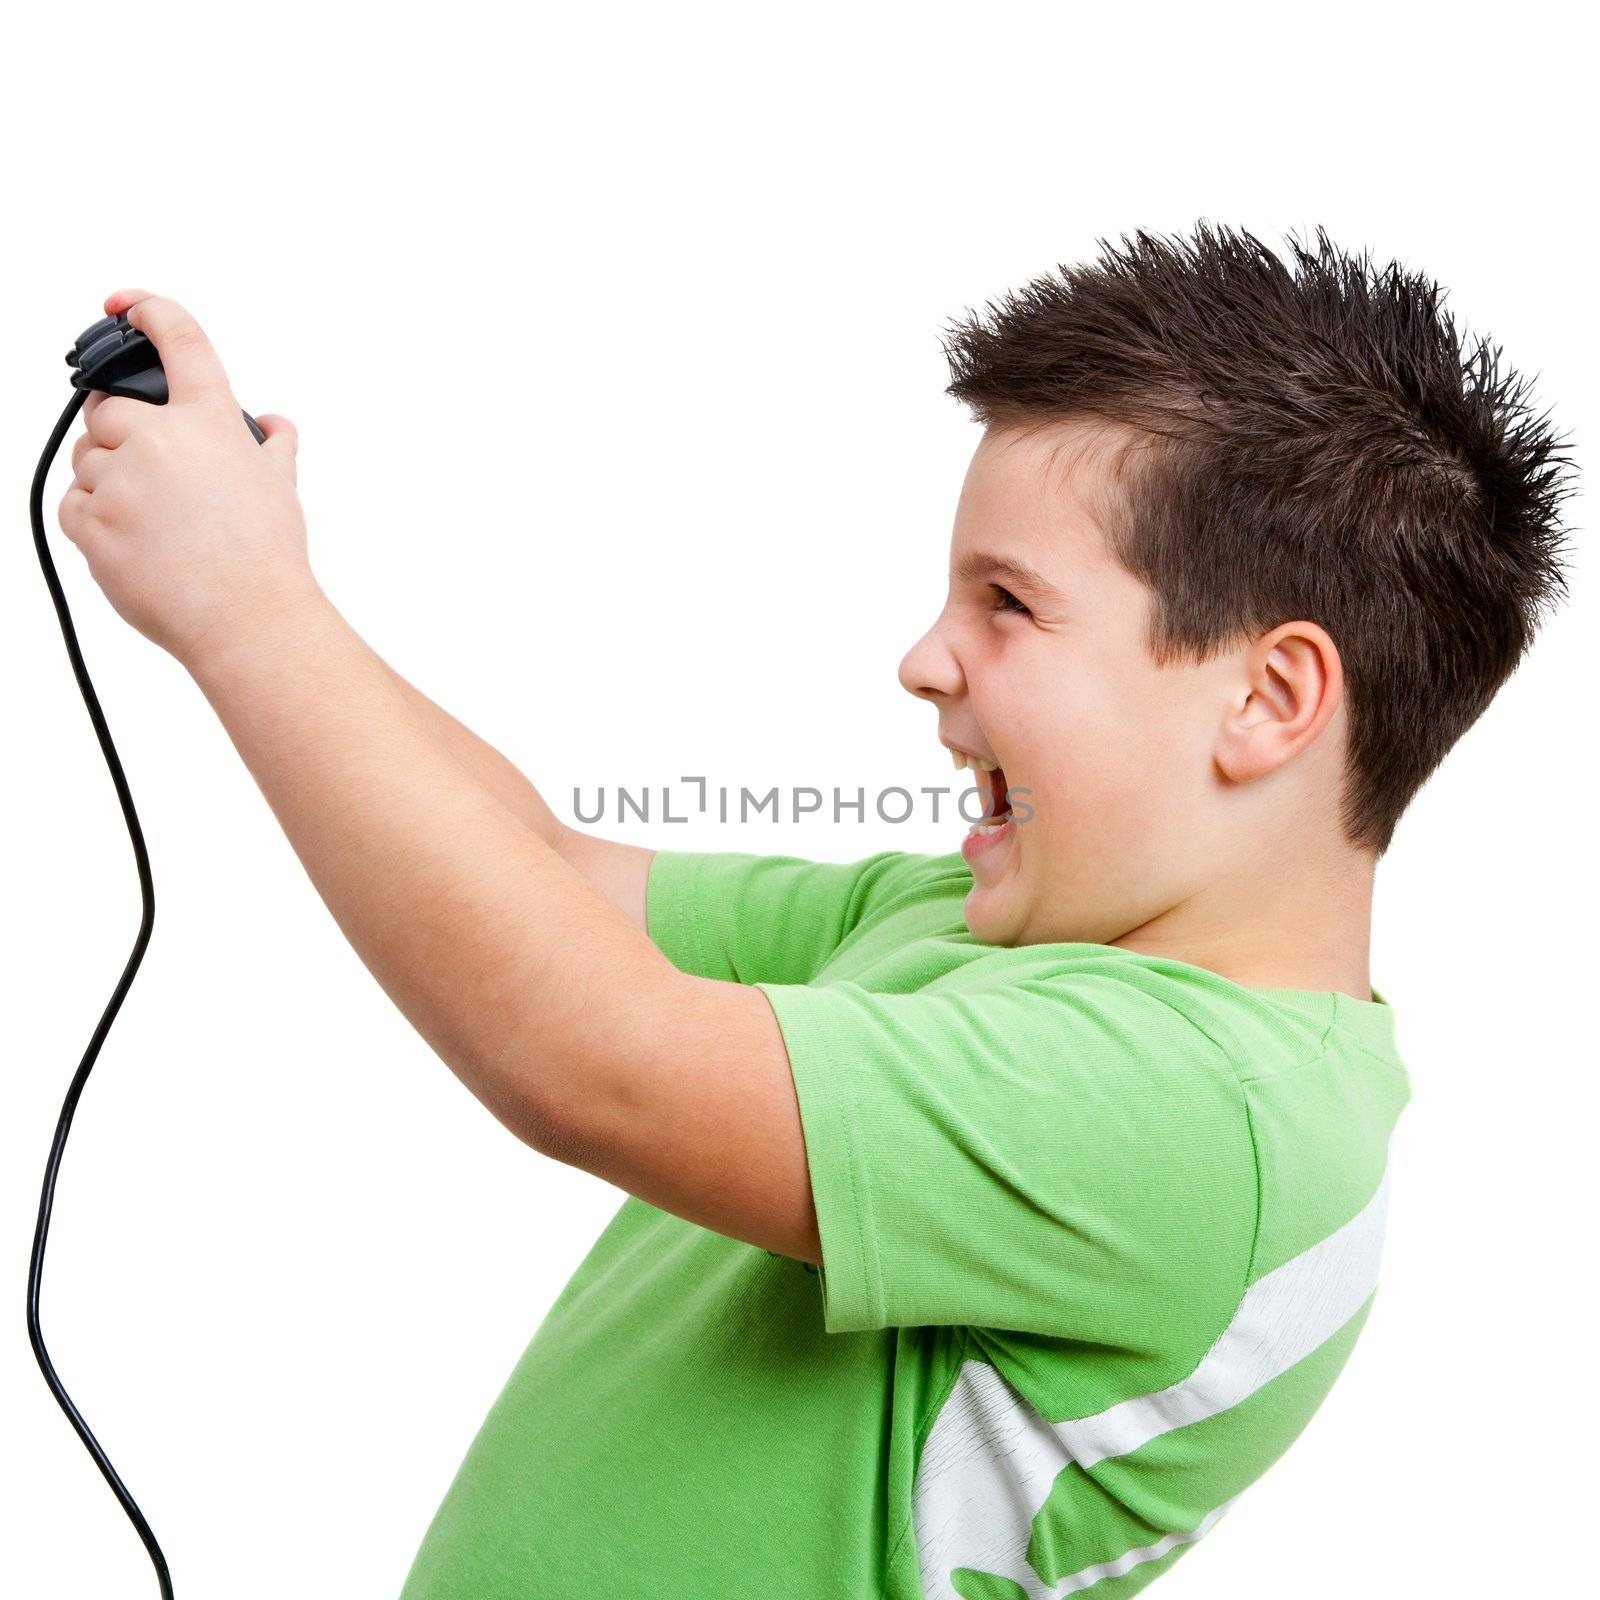 Boy playing with game console by karelnoppe